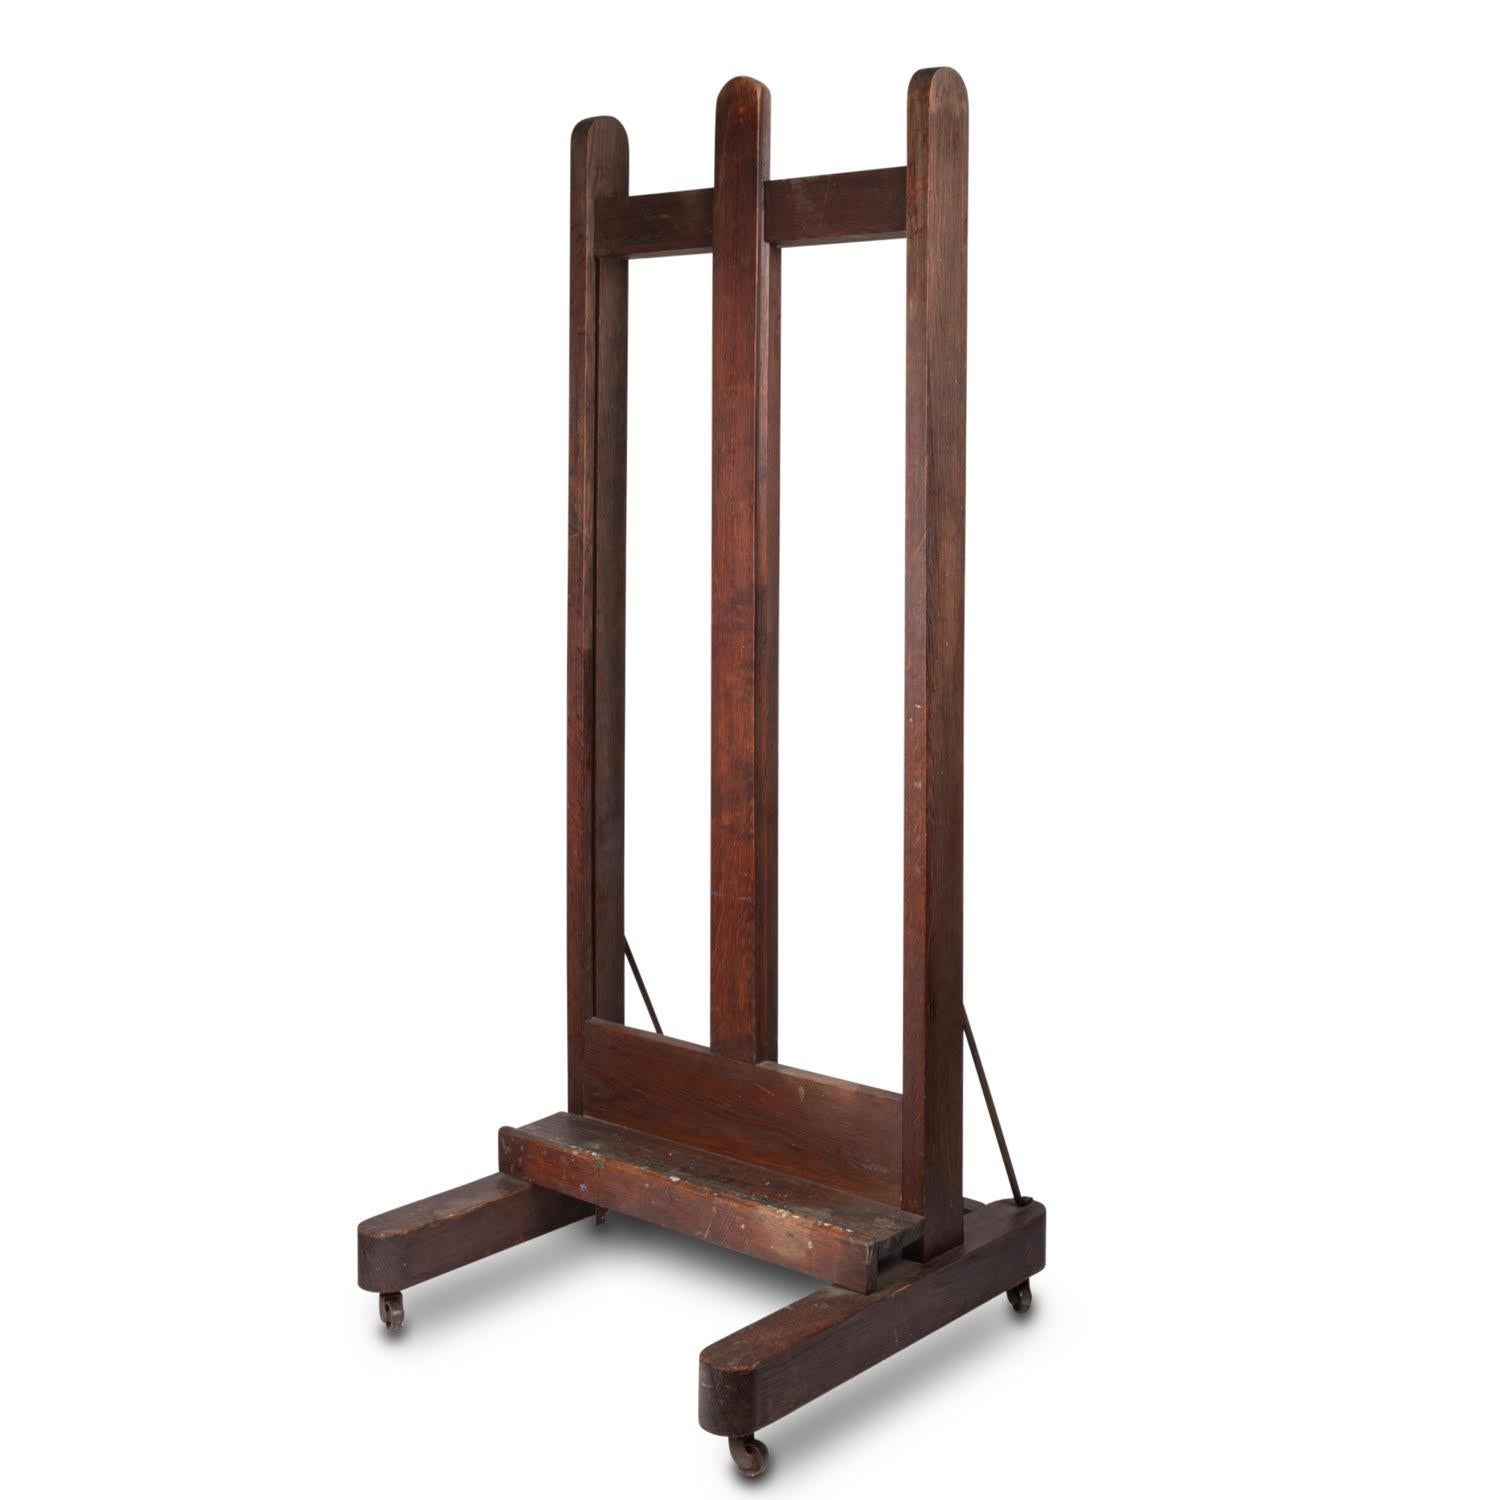 Painter's easel with castors, early 20th century.

Early 20th century oak easel with 4 castors.  
H: 155cm , W: 61cm, D: 55cm